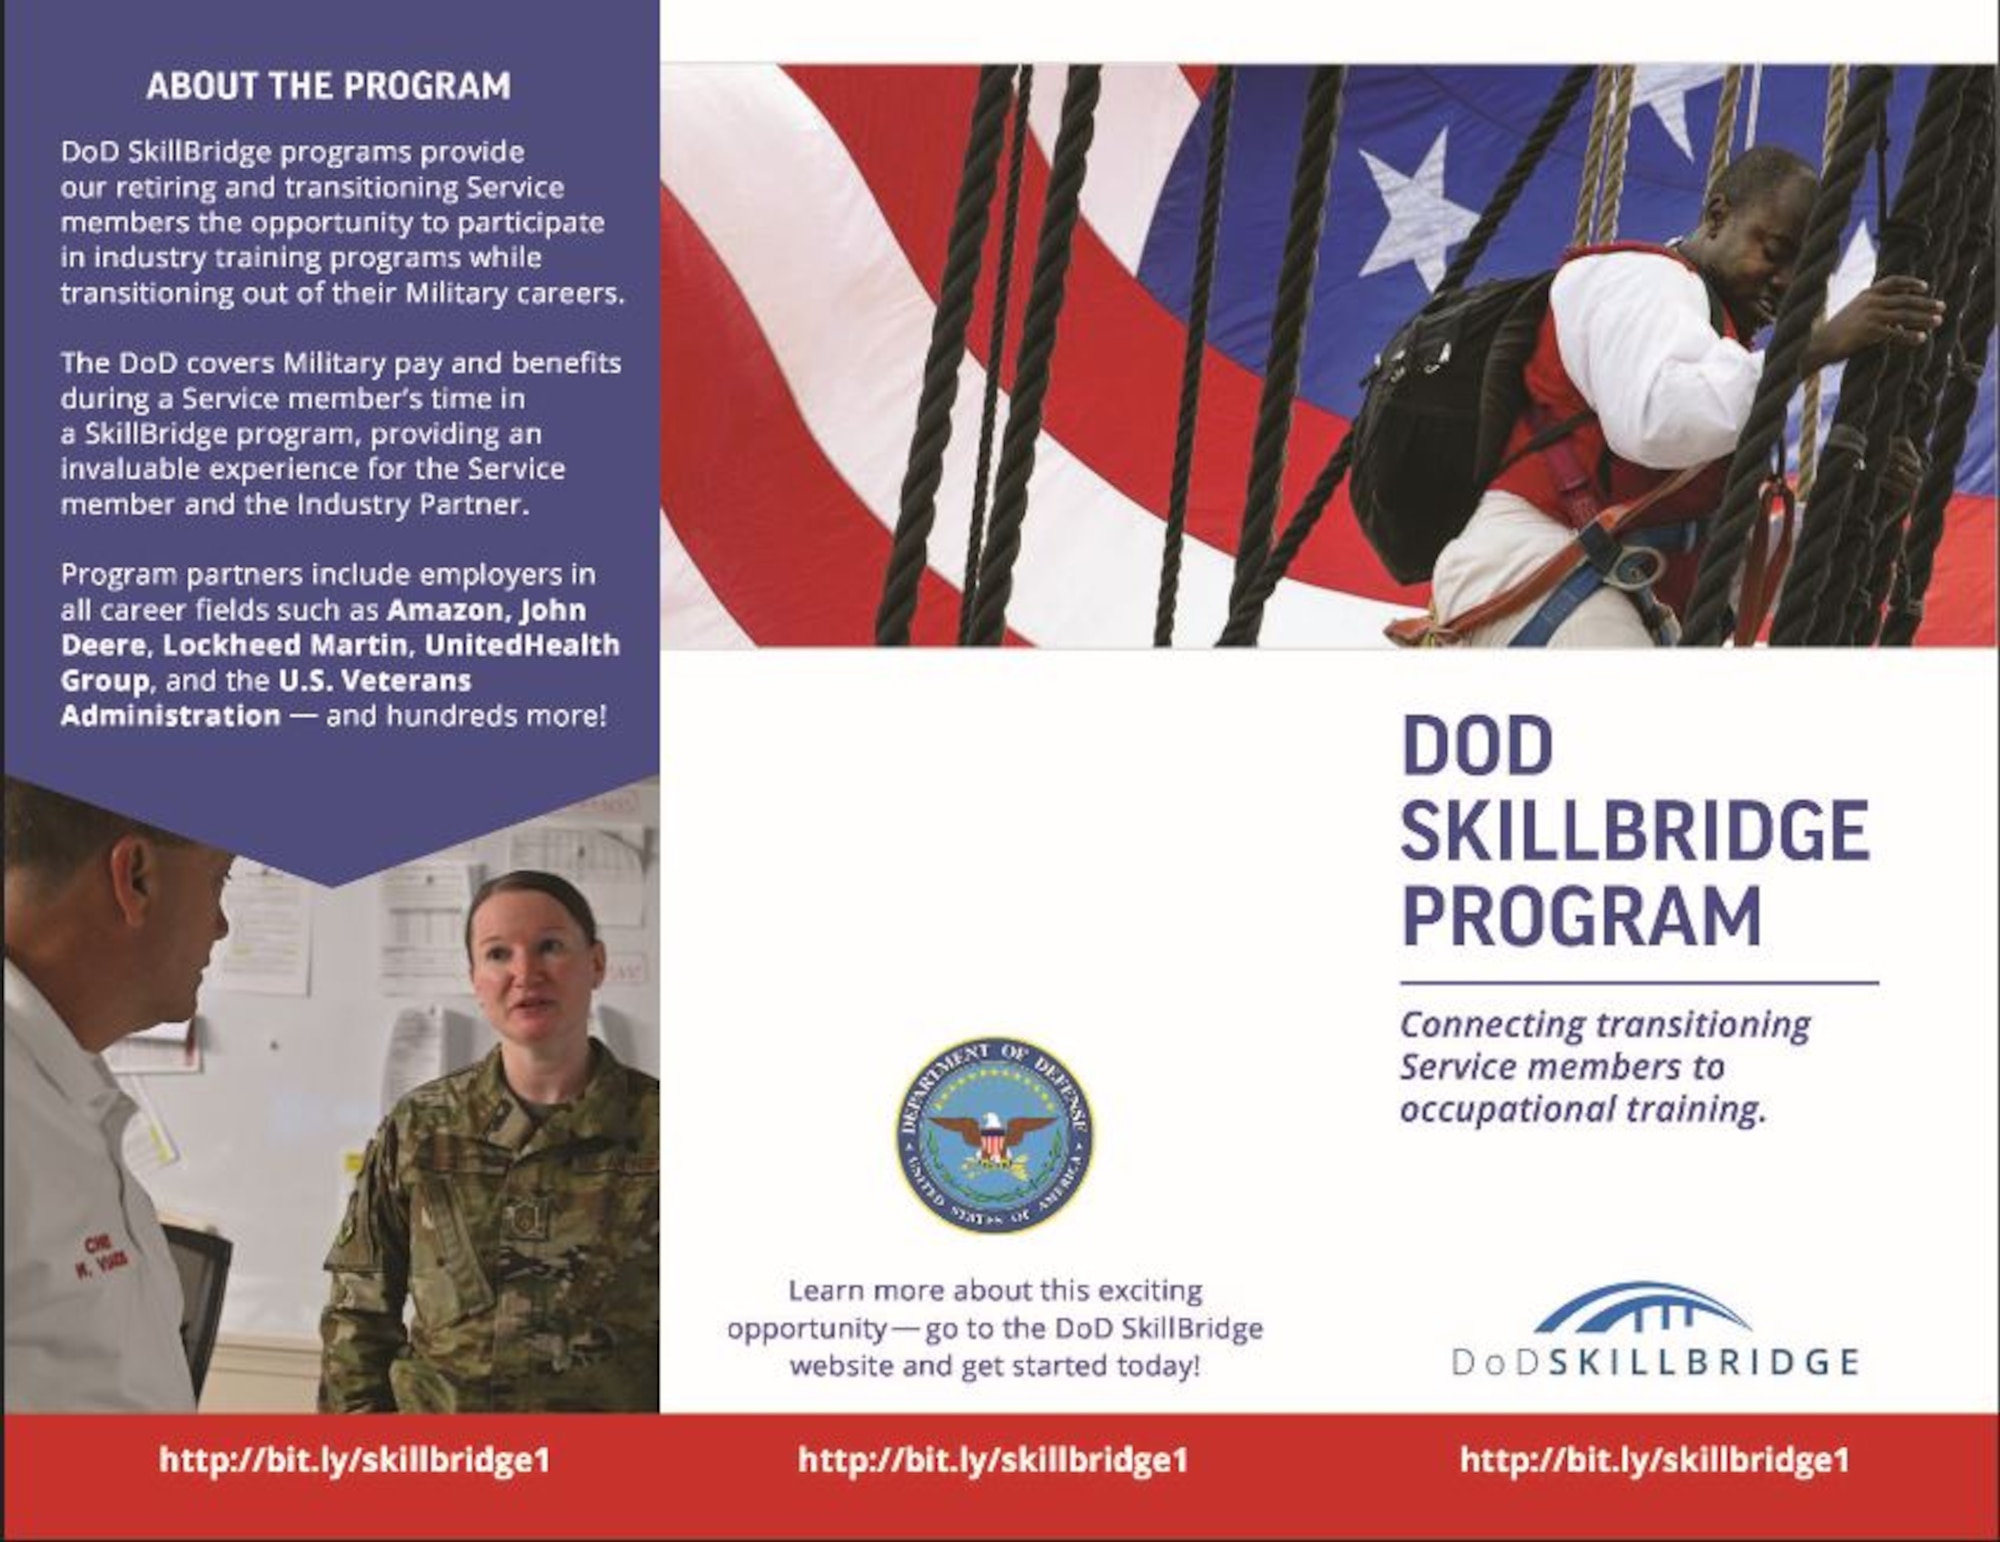 Airmen preparing to separate from active duty service can take steps toward their next career using the Department of Defense SkillBridge Program.